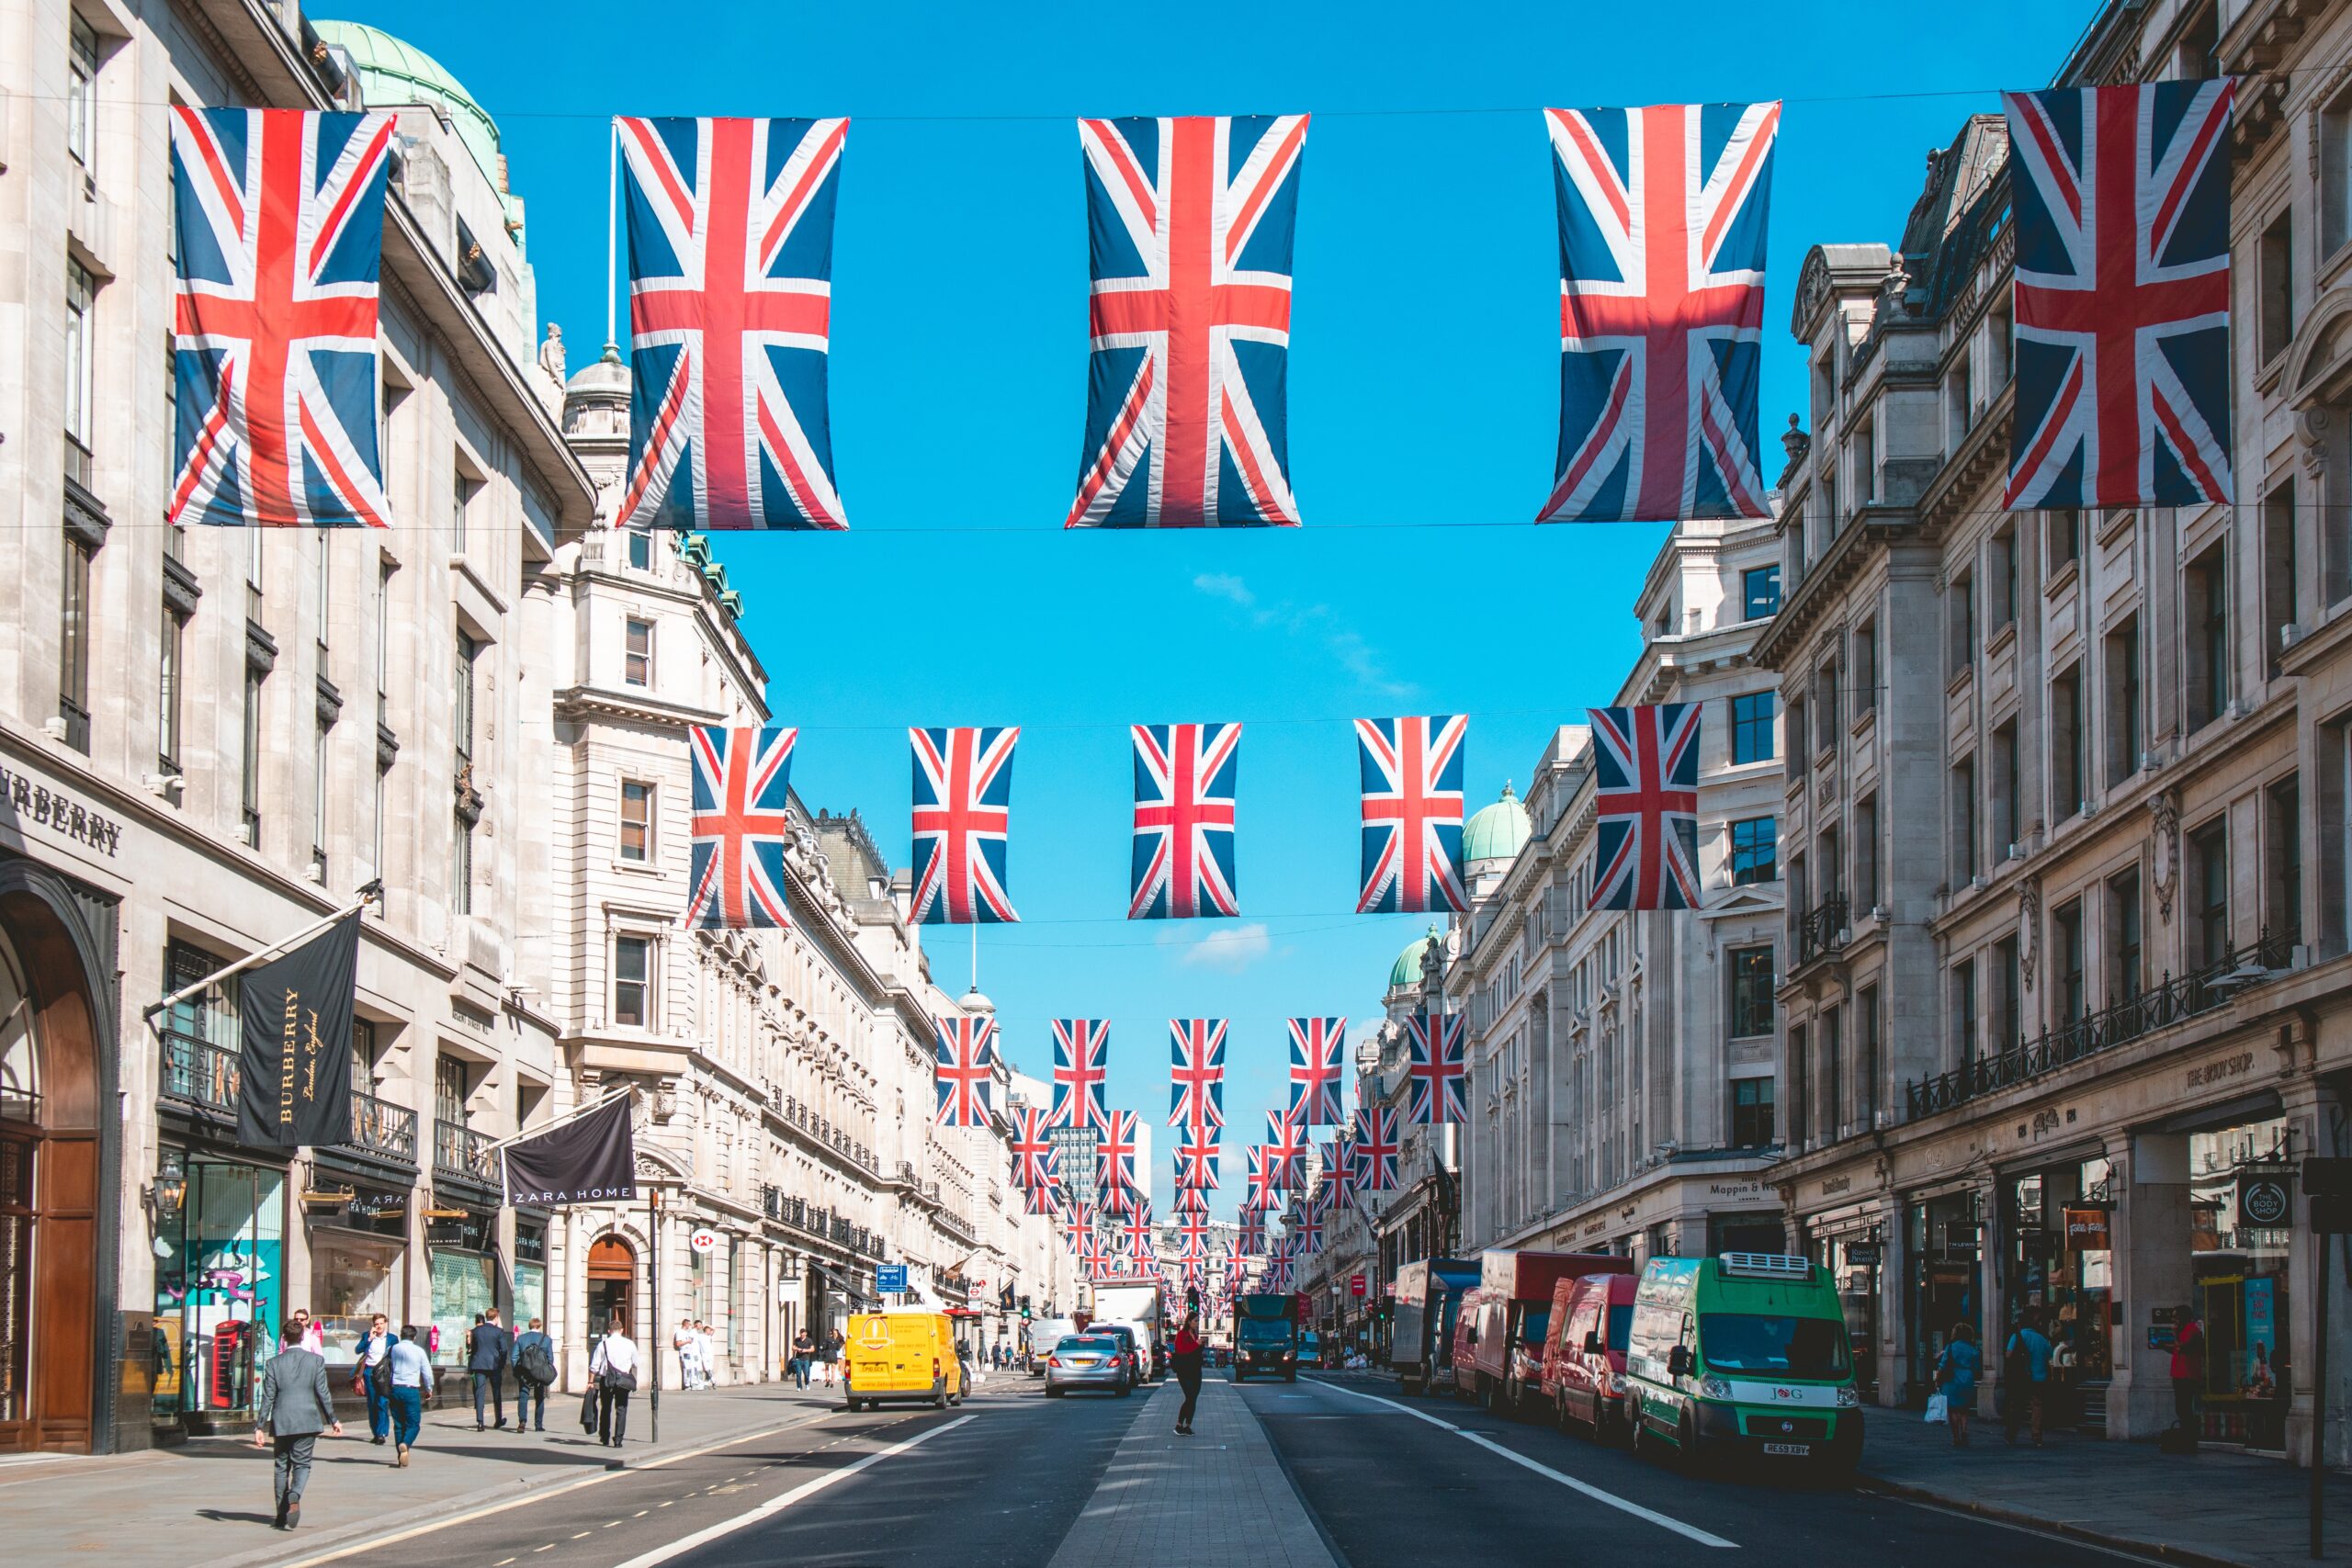 A short trip to London is an opportunity to explore the local culture and see the best there is to see. Check out this three day itinerary that includes the best sites. 
pictured: the streets of London lined with British flags and people